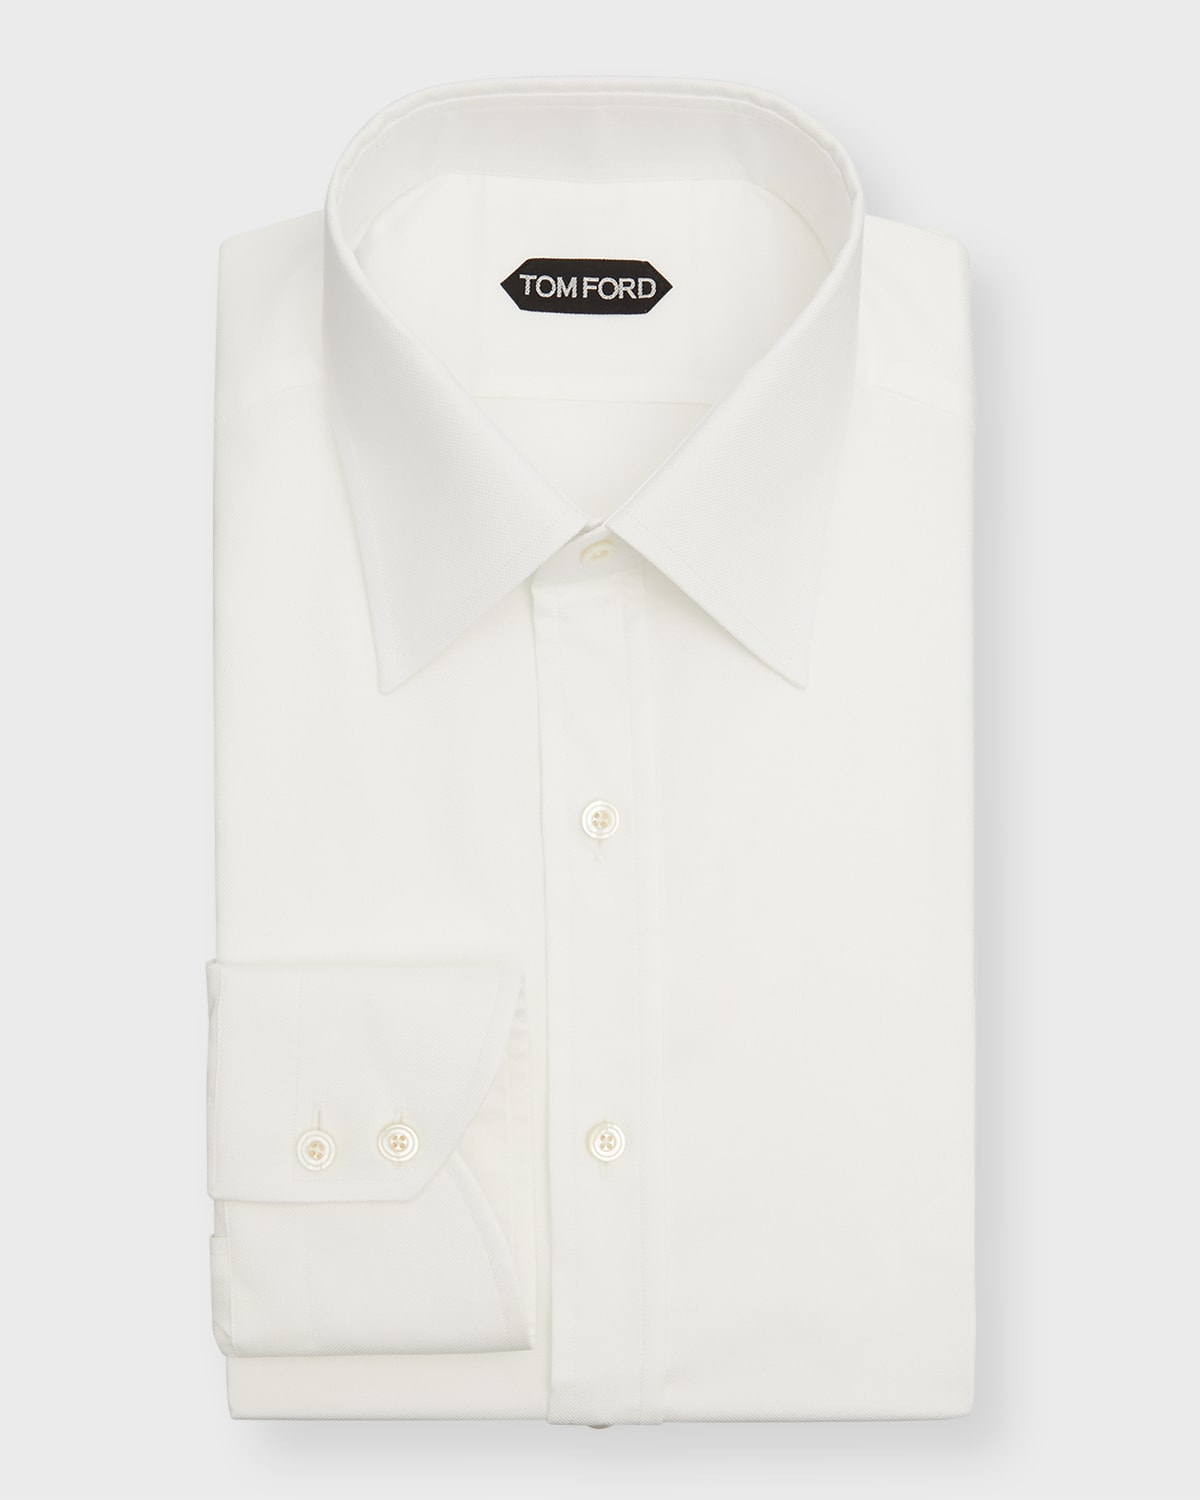 Tom Ford Men's Slim Fit Cotton Dress Shirt In Wht Sld